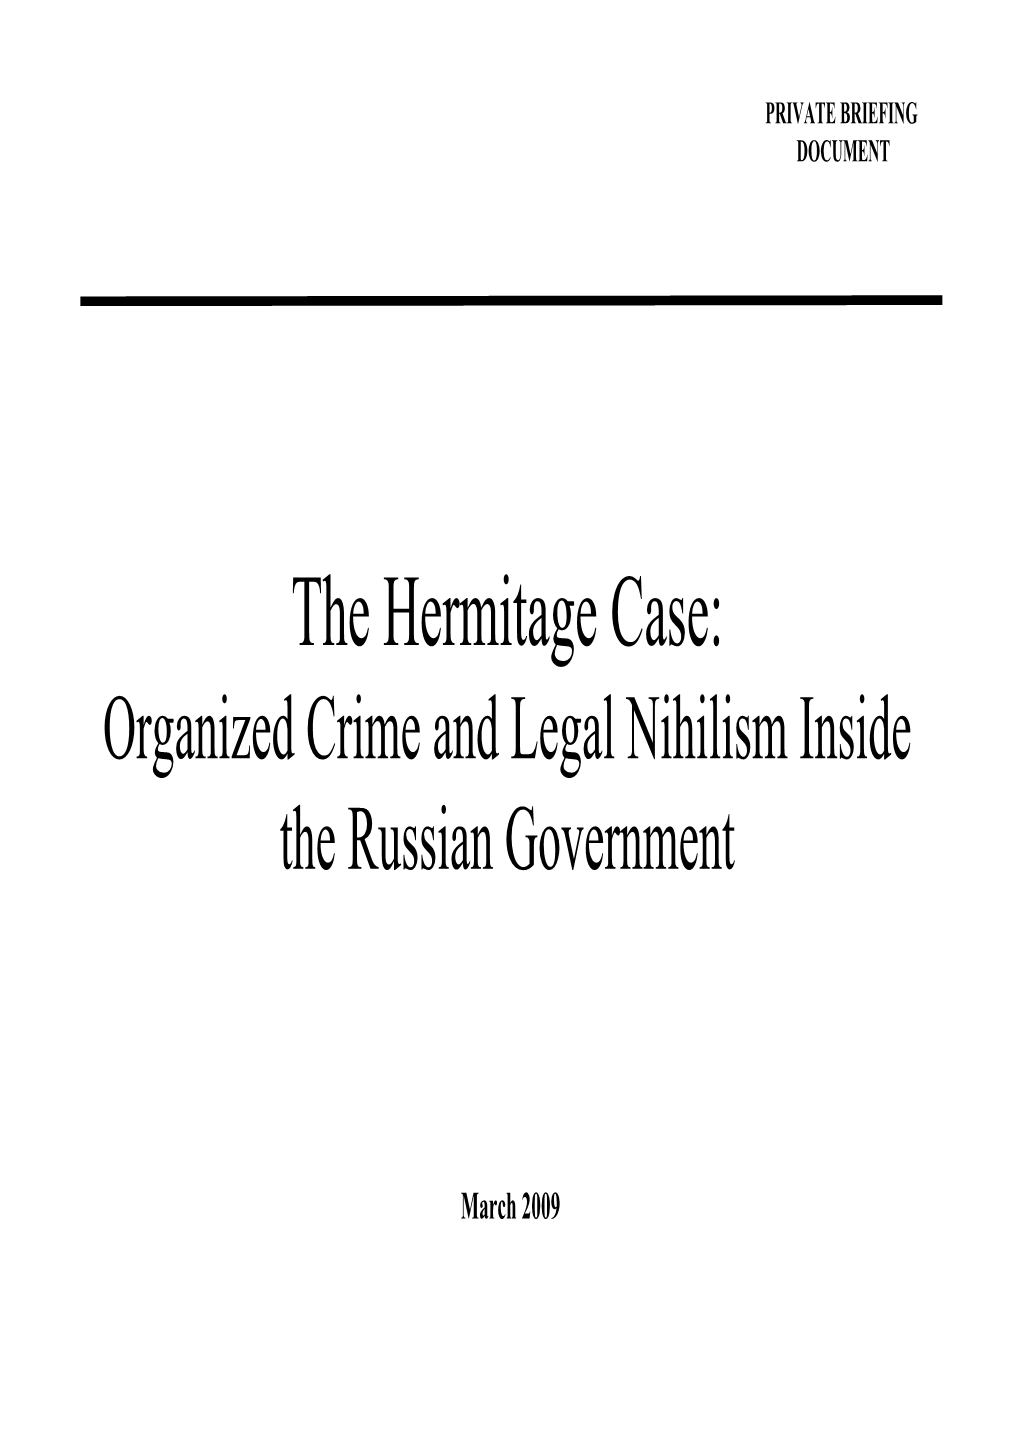 Hermitage Capital Management That Invested in Russia on Behalf of Institutional and Individual Investors from Around the World